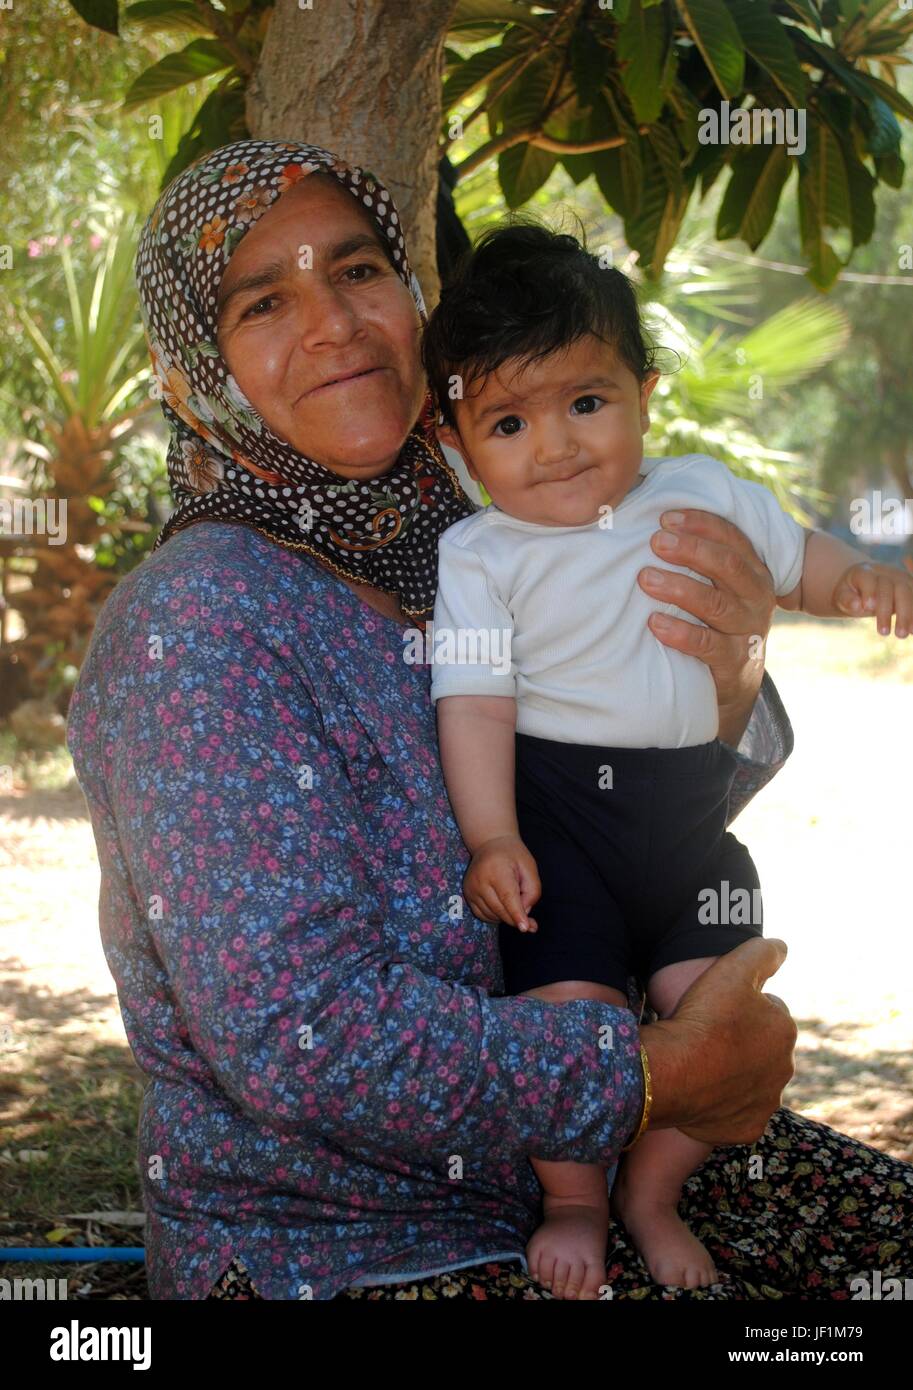 Turkish woman with baby Stock Photo